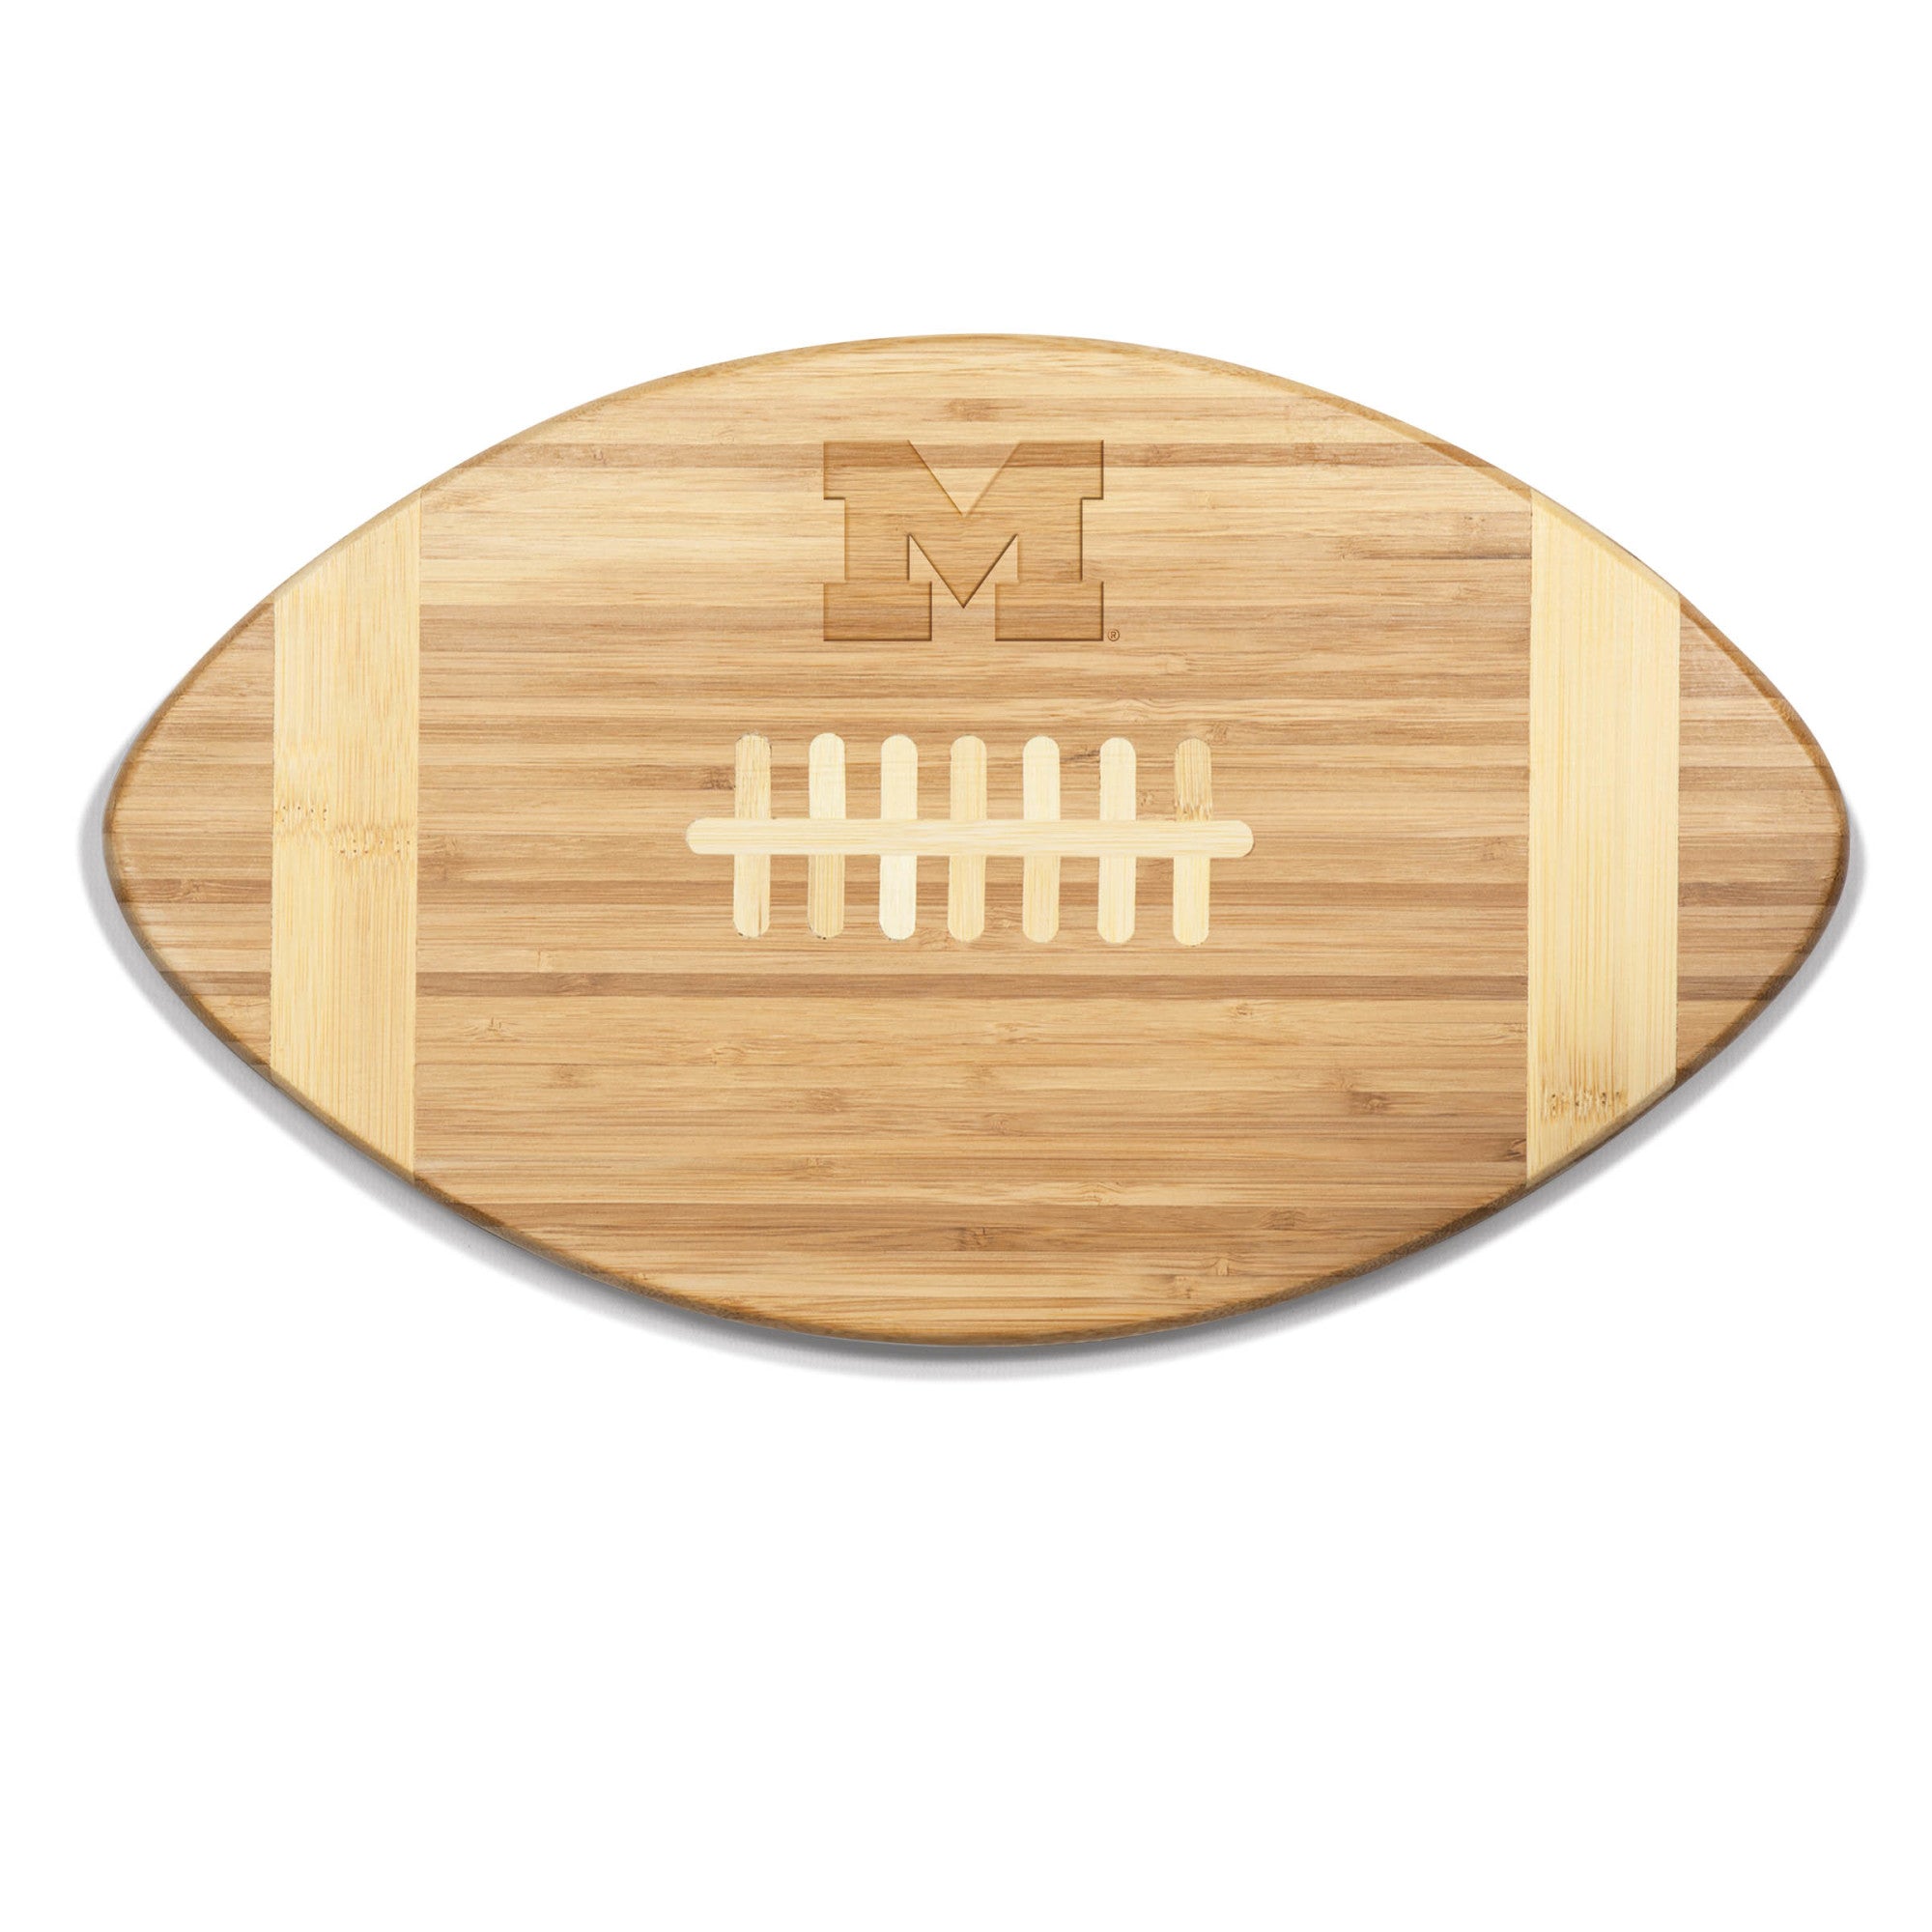 Michigan Wolverines - Touchdown! Football Cutting Board & Serving Tray